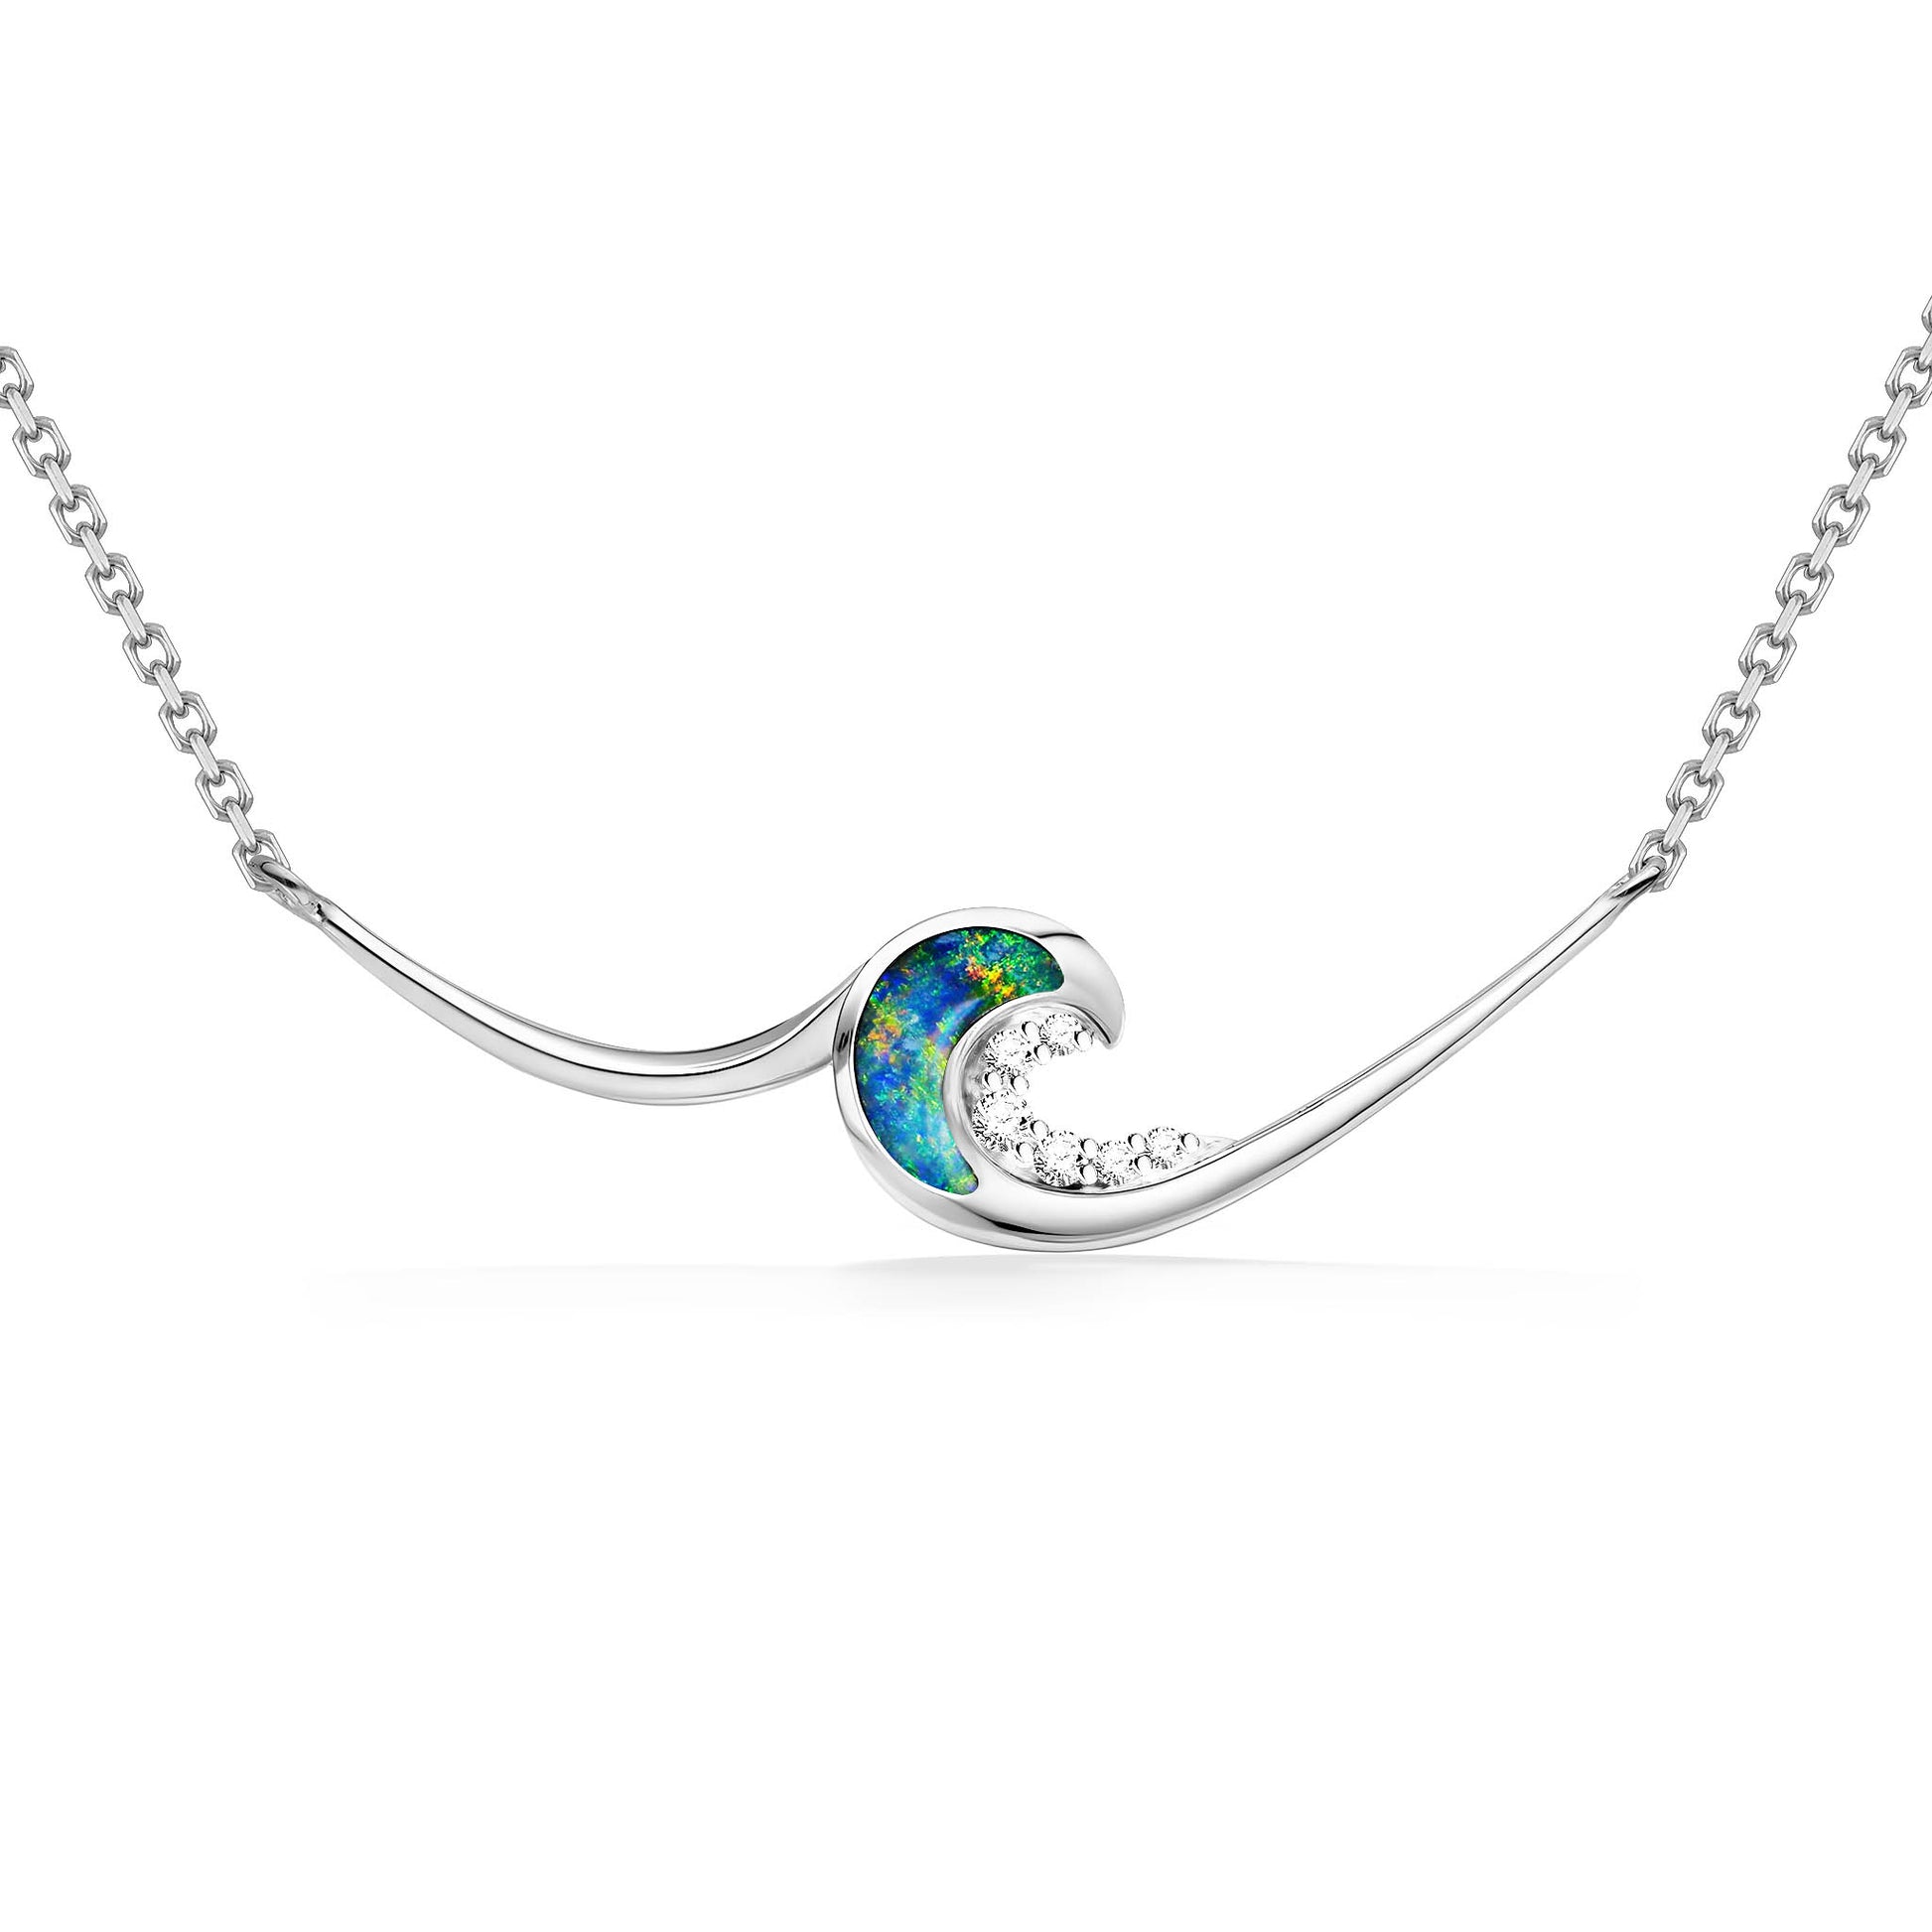 44229 - 14K White Gold - Ocean Swell Necklace